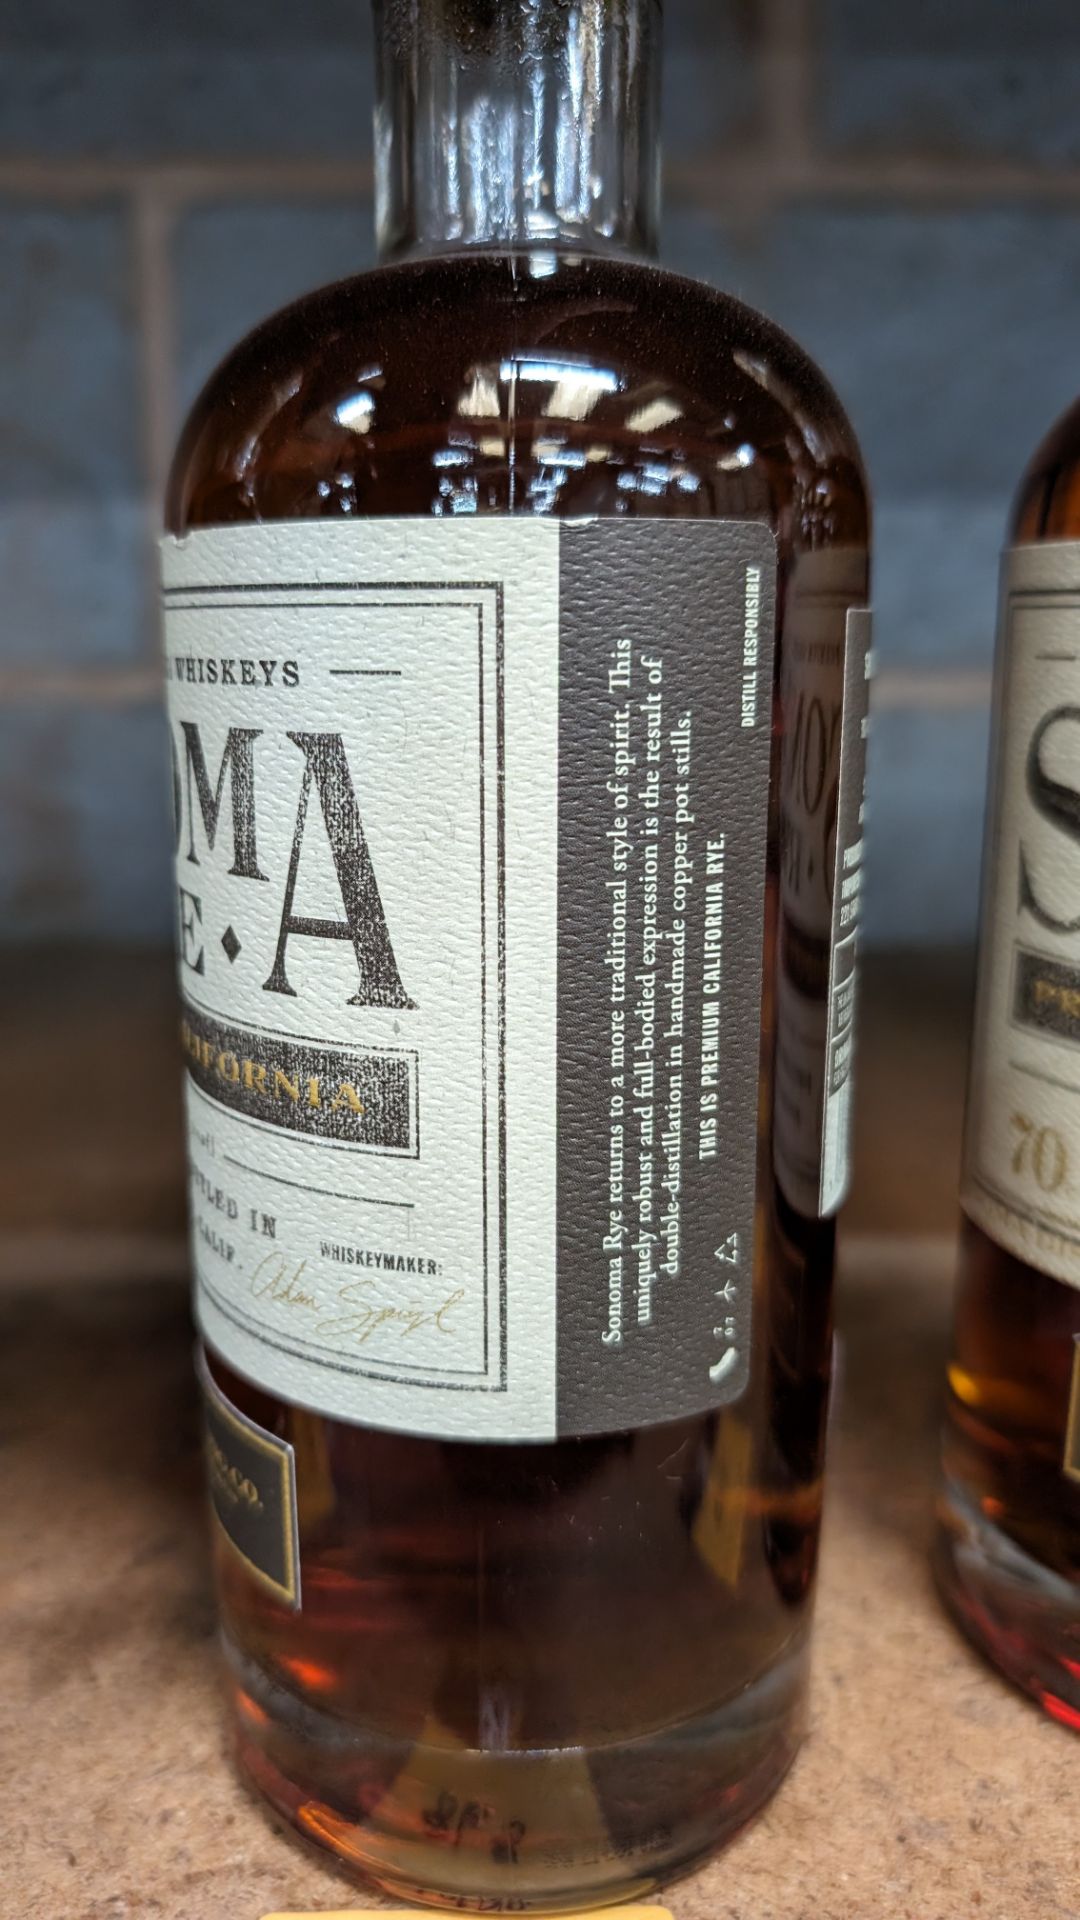 1 off 700ml bottle of Sonoma Rye Whiskey. 46.5% alc/vol (93 proof). Distilled and bottled in Sonom - Image 5 of 5